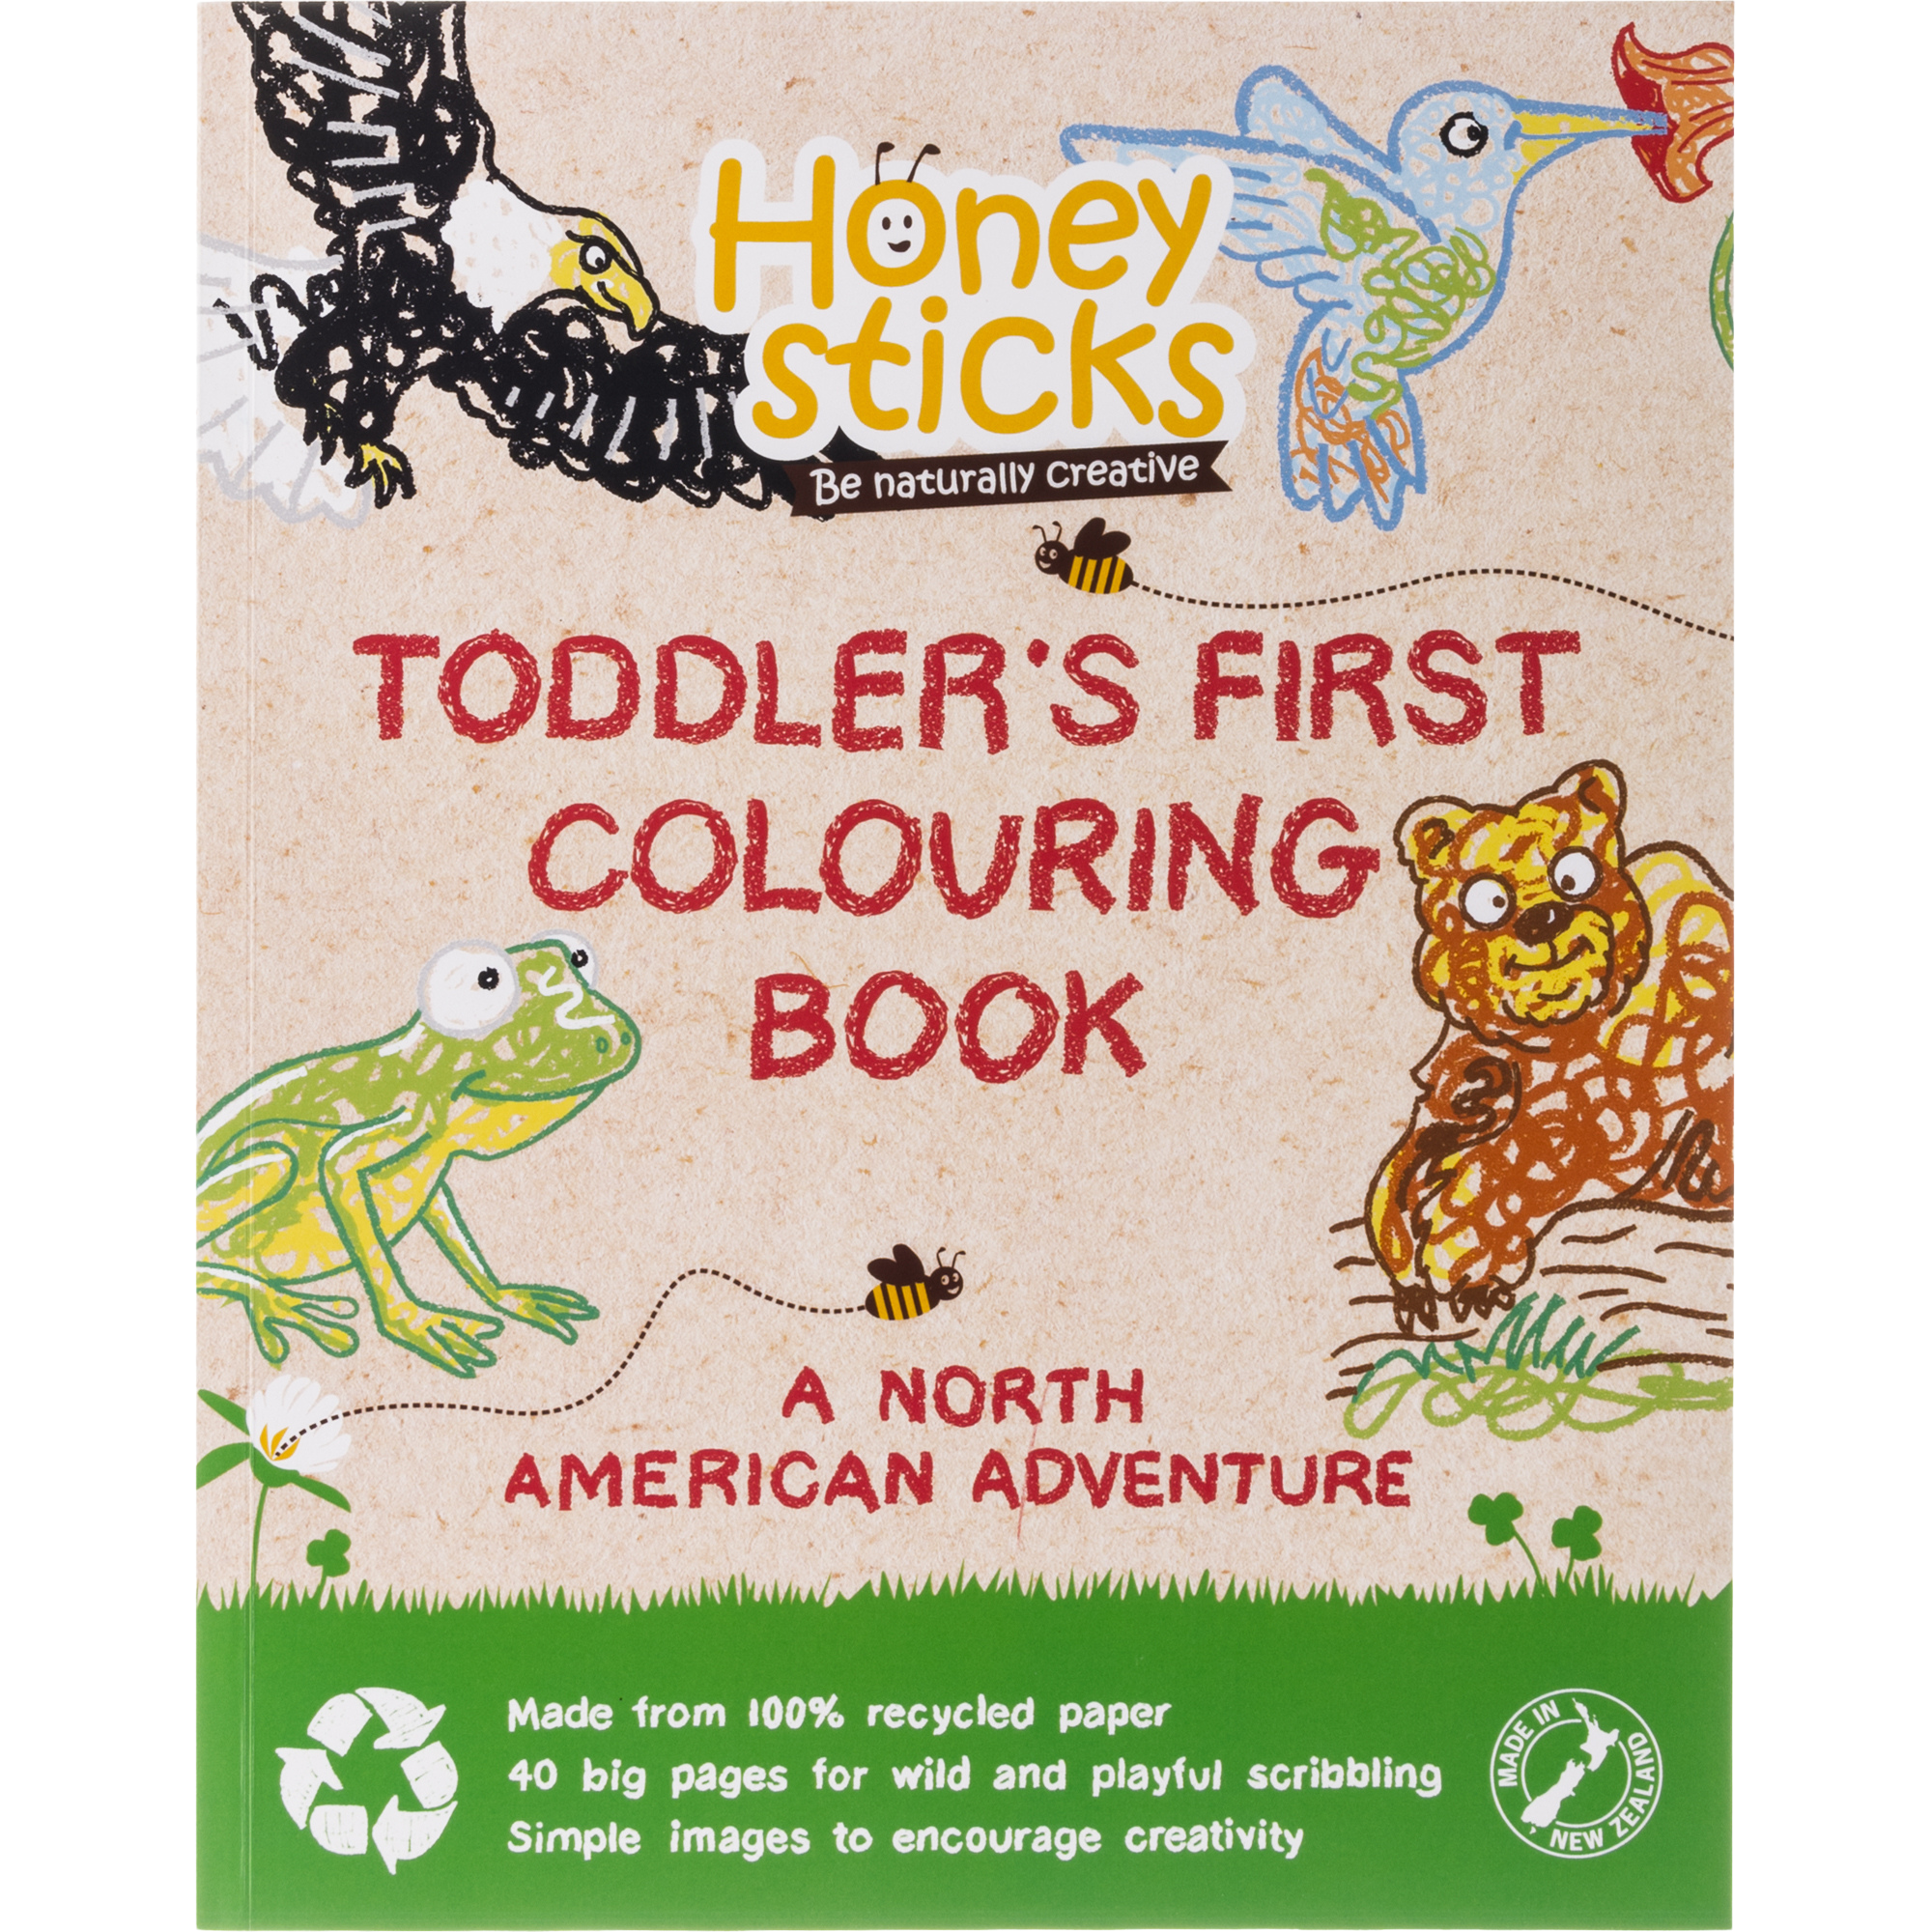 Toddlers First Coloring Book - A North American Adventure